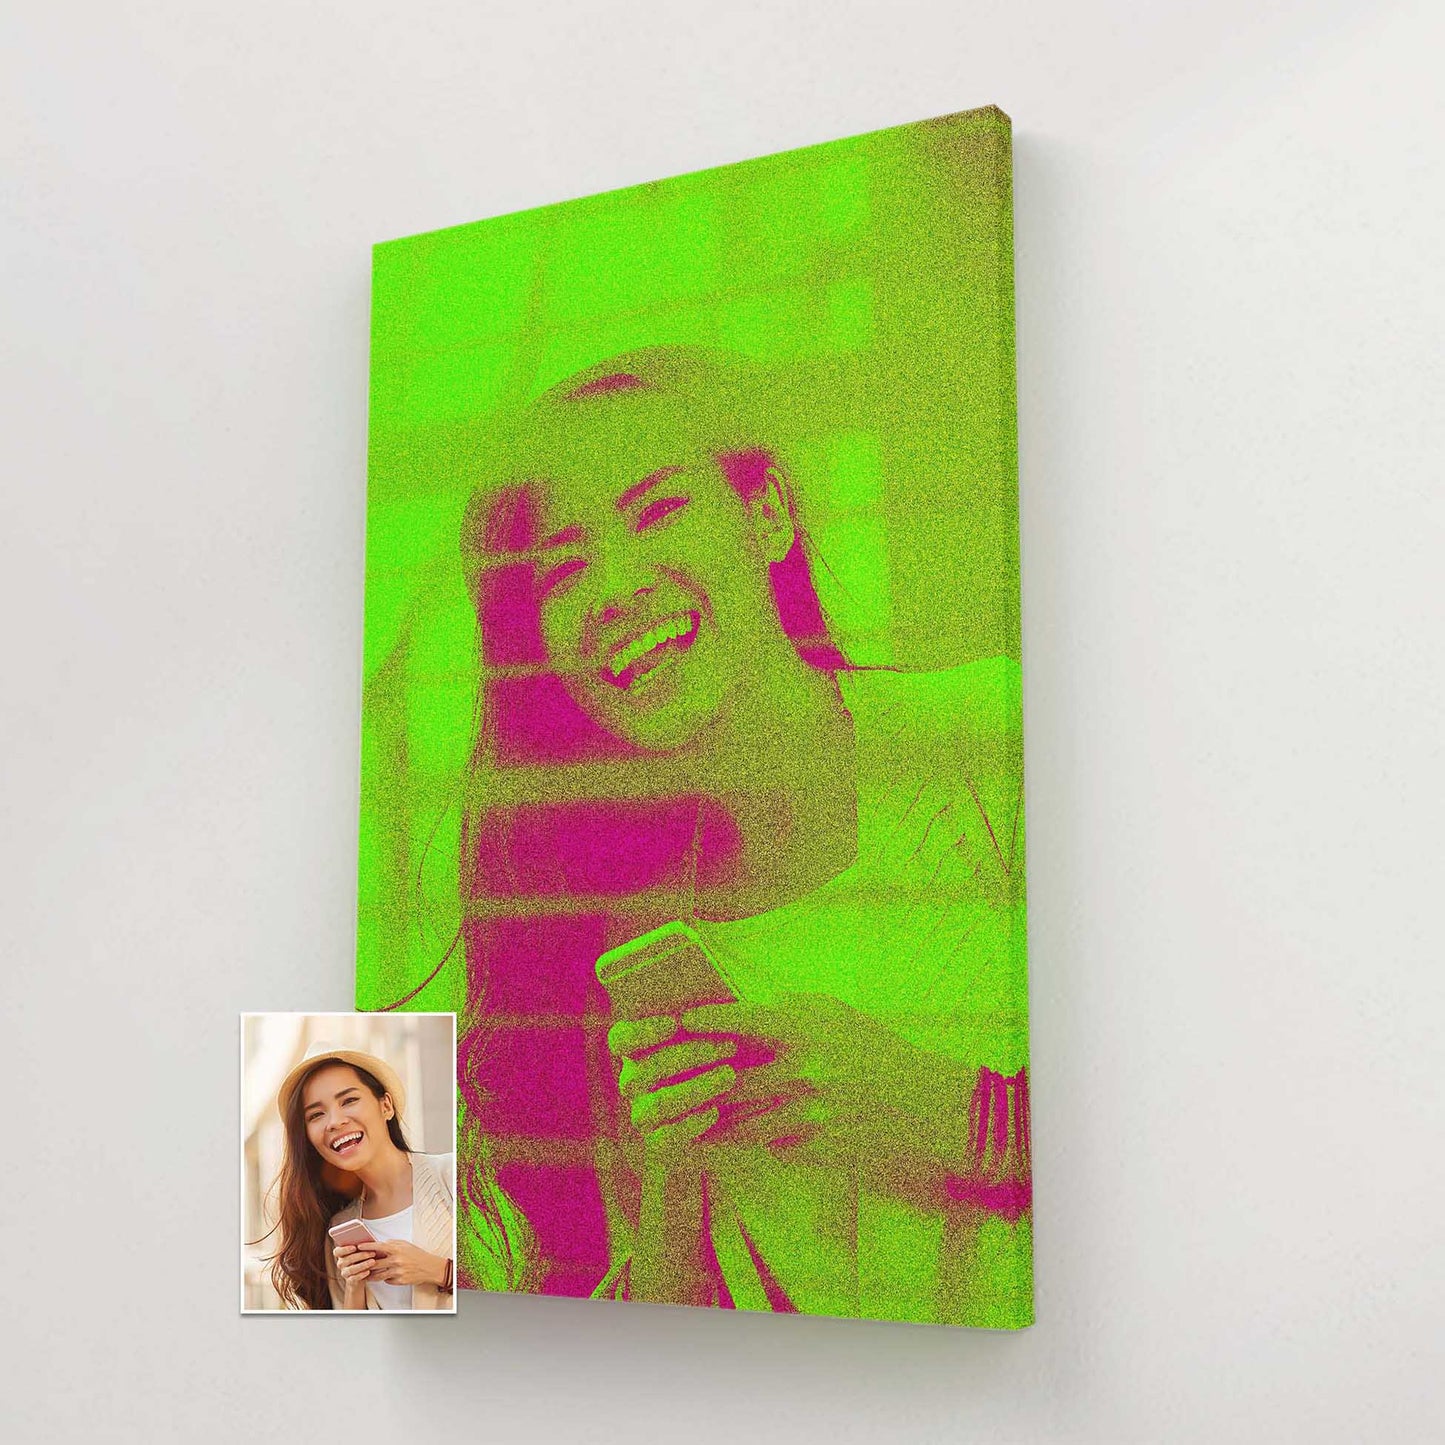 Make a statement with our personalised neon green canvas, a striking and eye-catching addition to any wall. Our talented artists will transform your photo into a work of art, using vibrant neon green shades to create a fresh and dynamic 